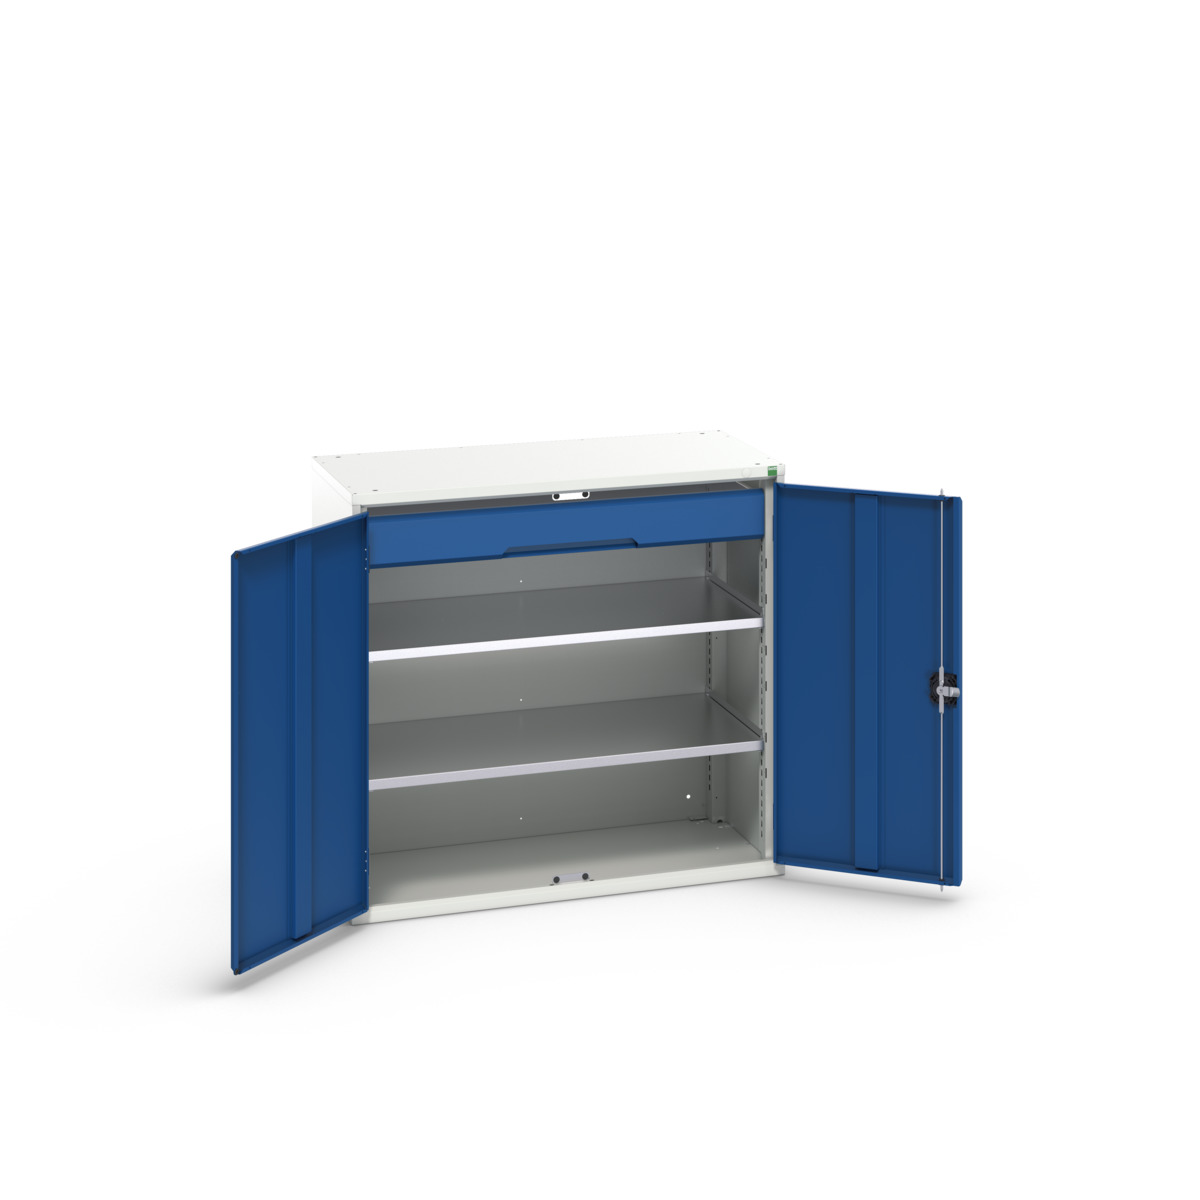 16926552.11 - verso kitted cupboard